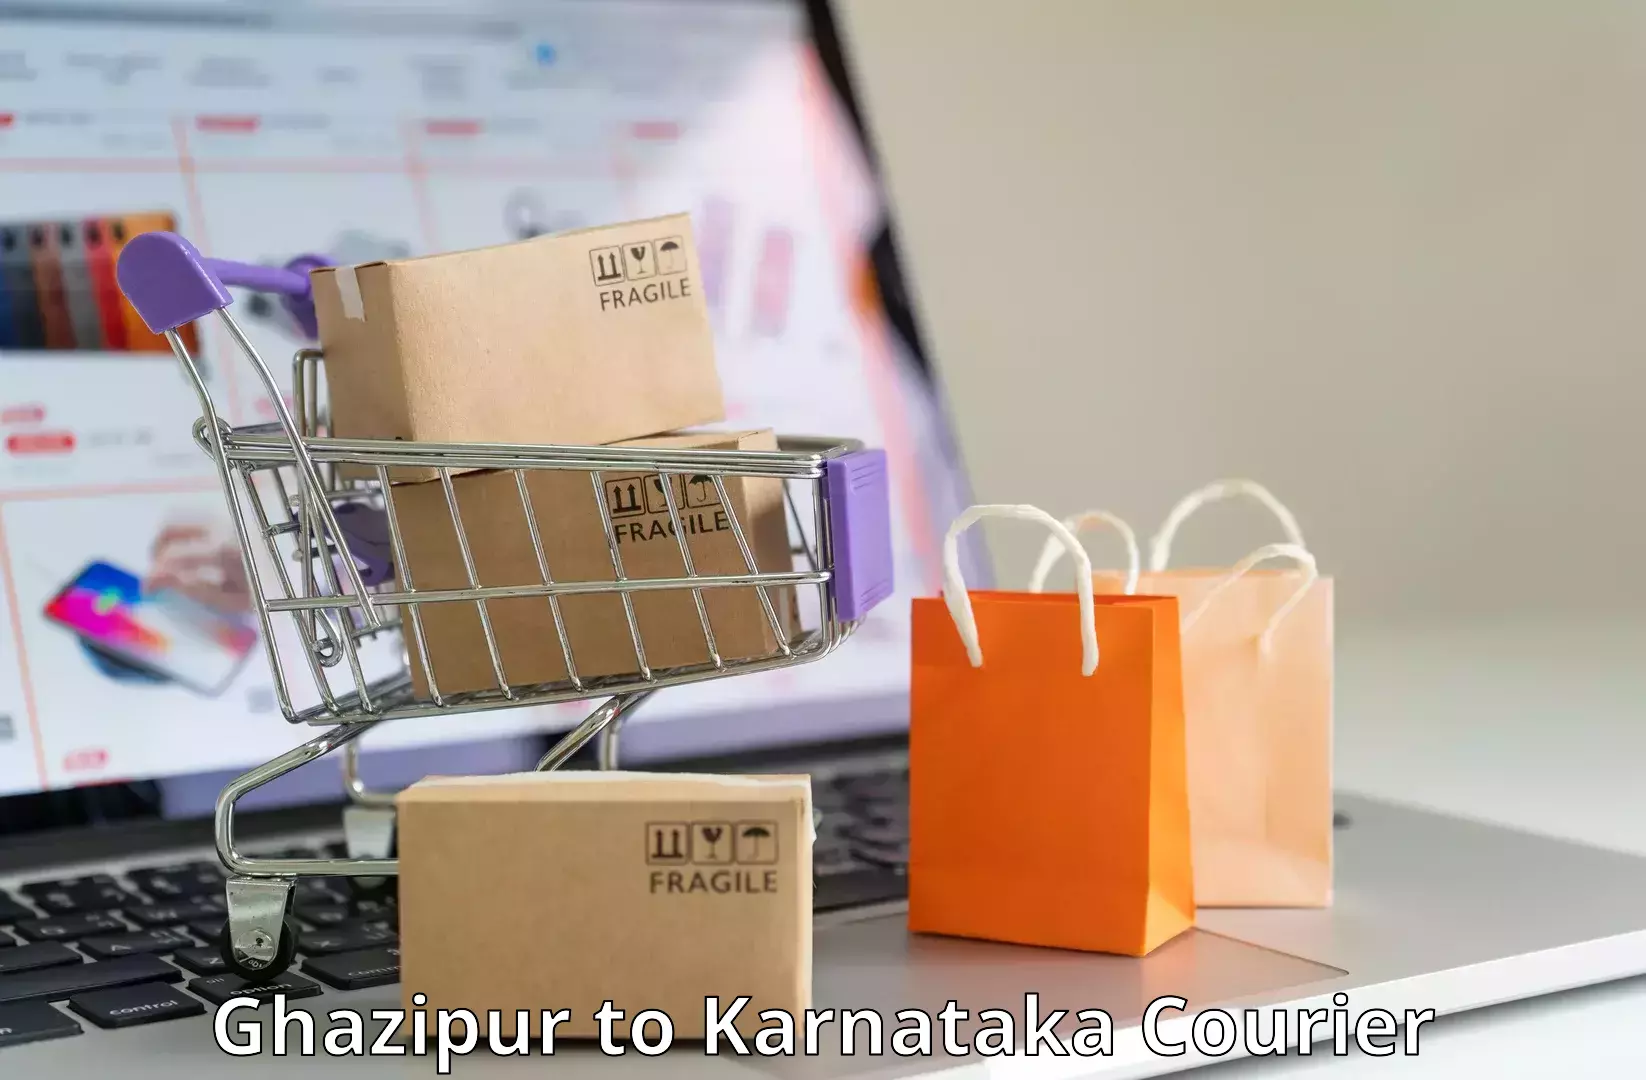 Customer-centric shipping Ghazipur to Channapatna